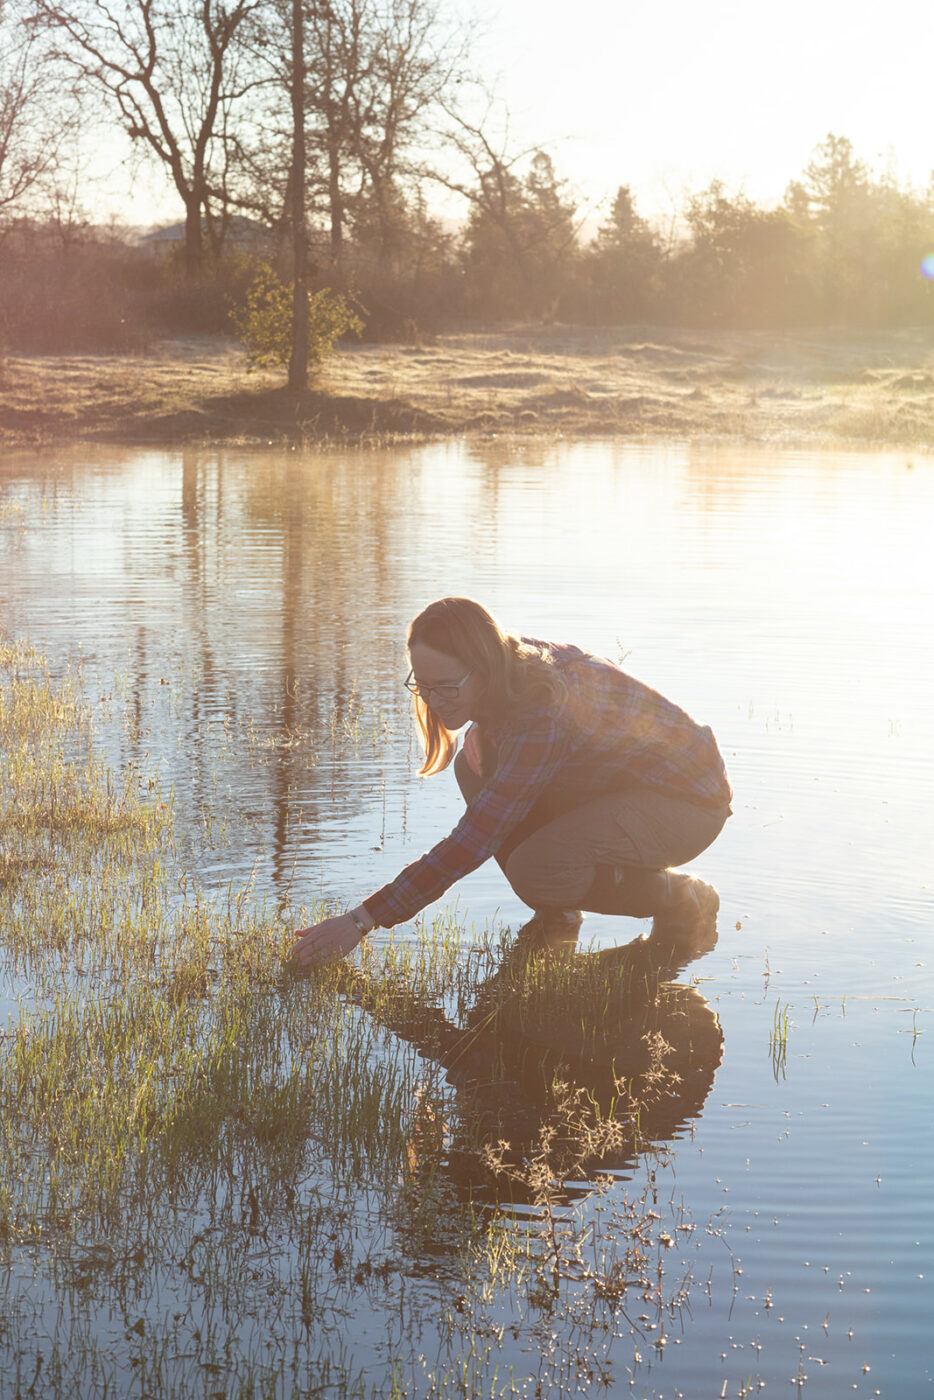 Ecologist Sarah Gordon studies tiny, endangered plants in seasonal vernal pools, like this one along the Laguna de Santa Rosa near Sebastopol. Vernal pools appear with winter rains and disappear by late spring. Gordon is hoping to better understand how changes in temperature affect plant health. (Eileen Roche/For Sonoma Magazine)